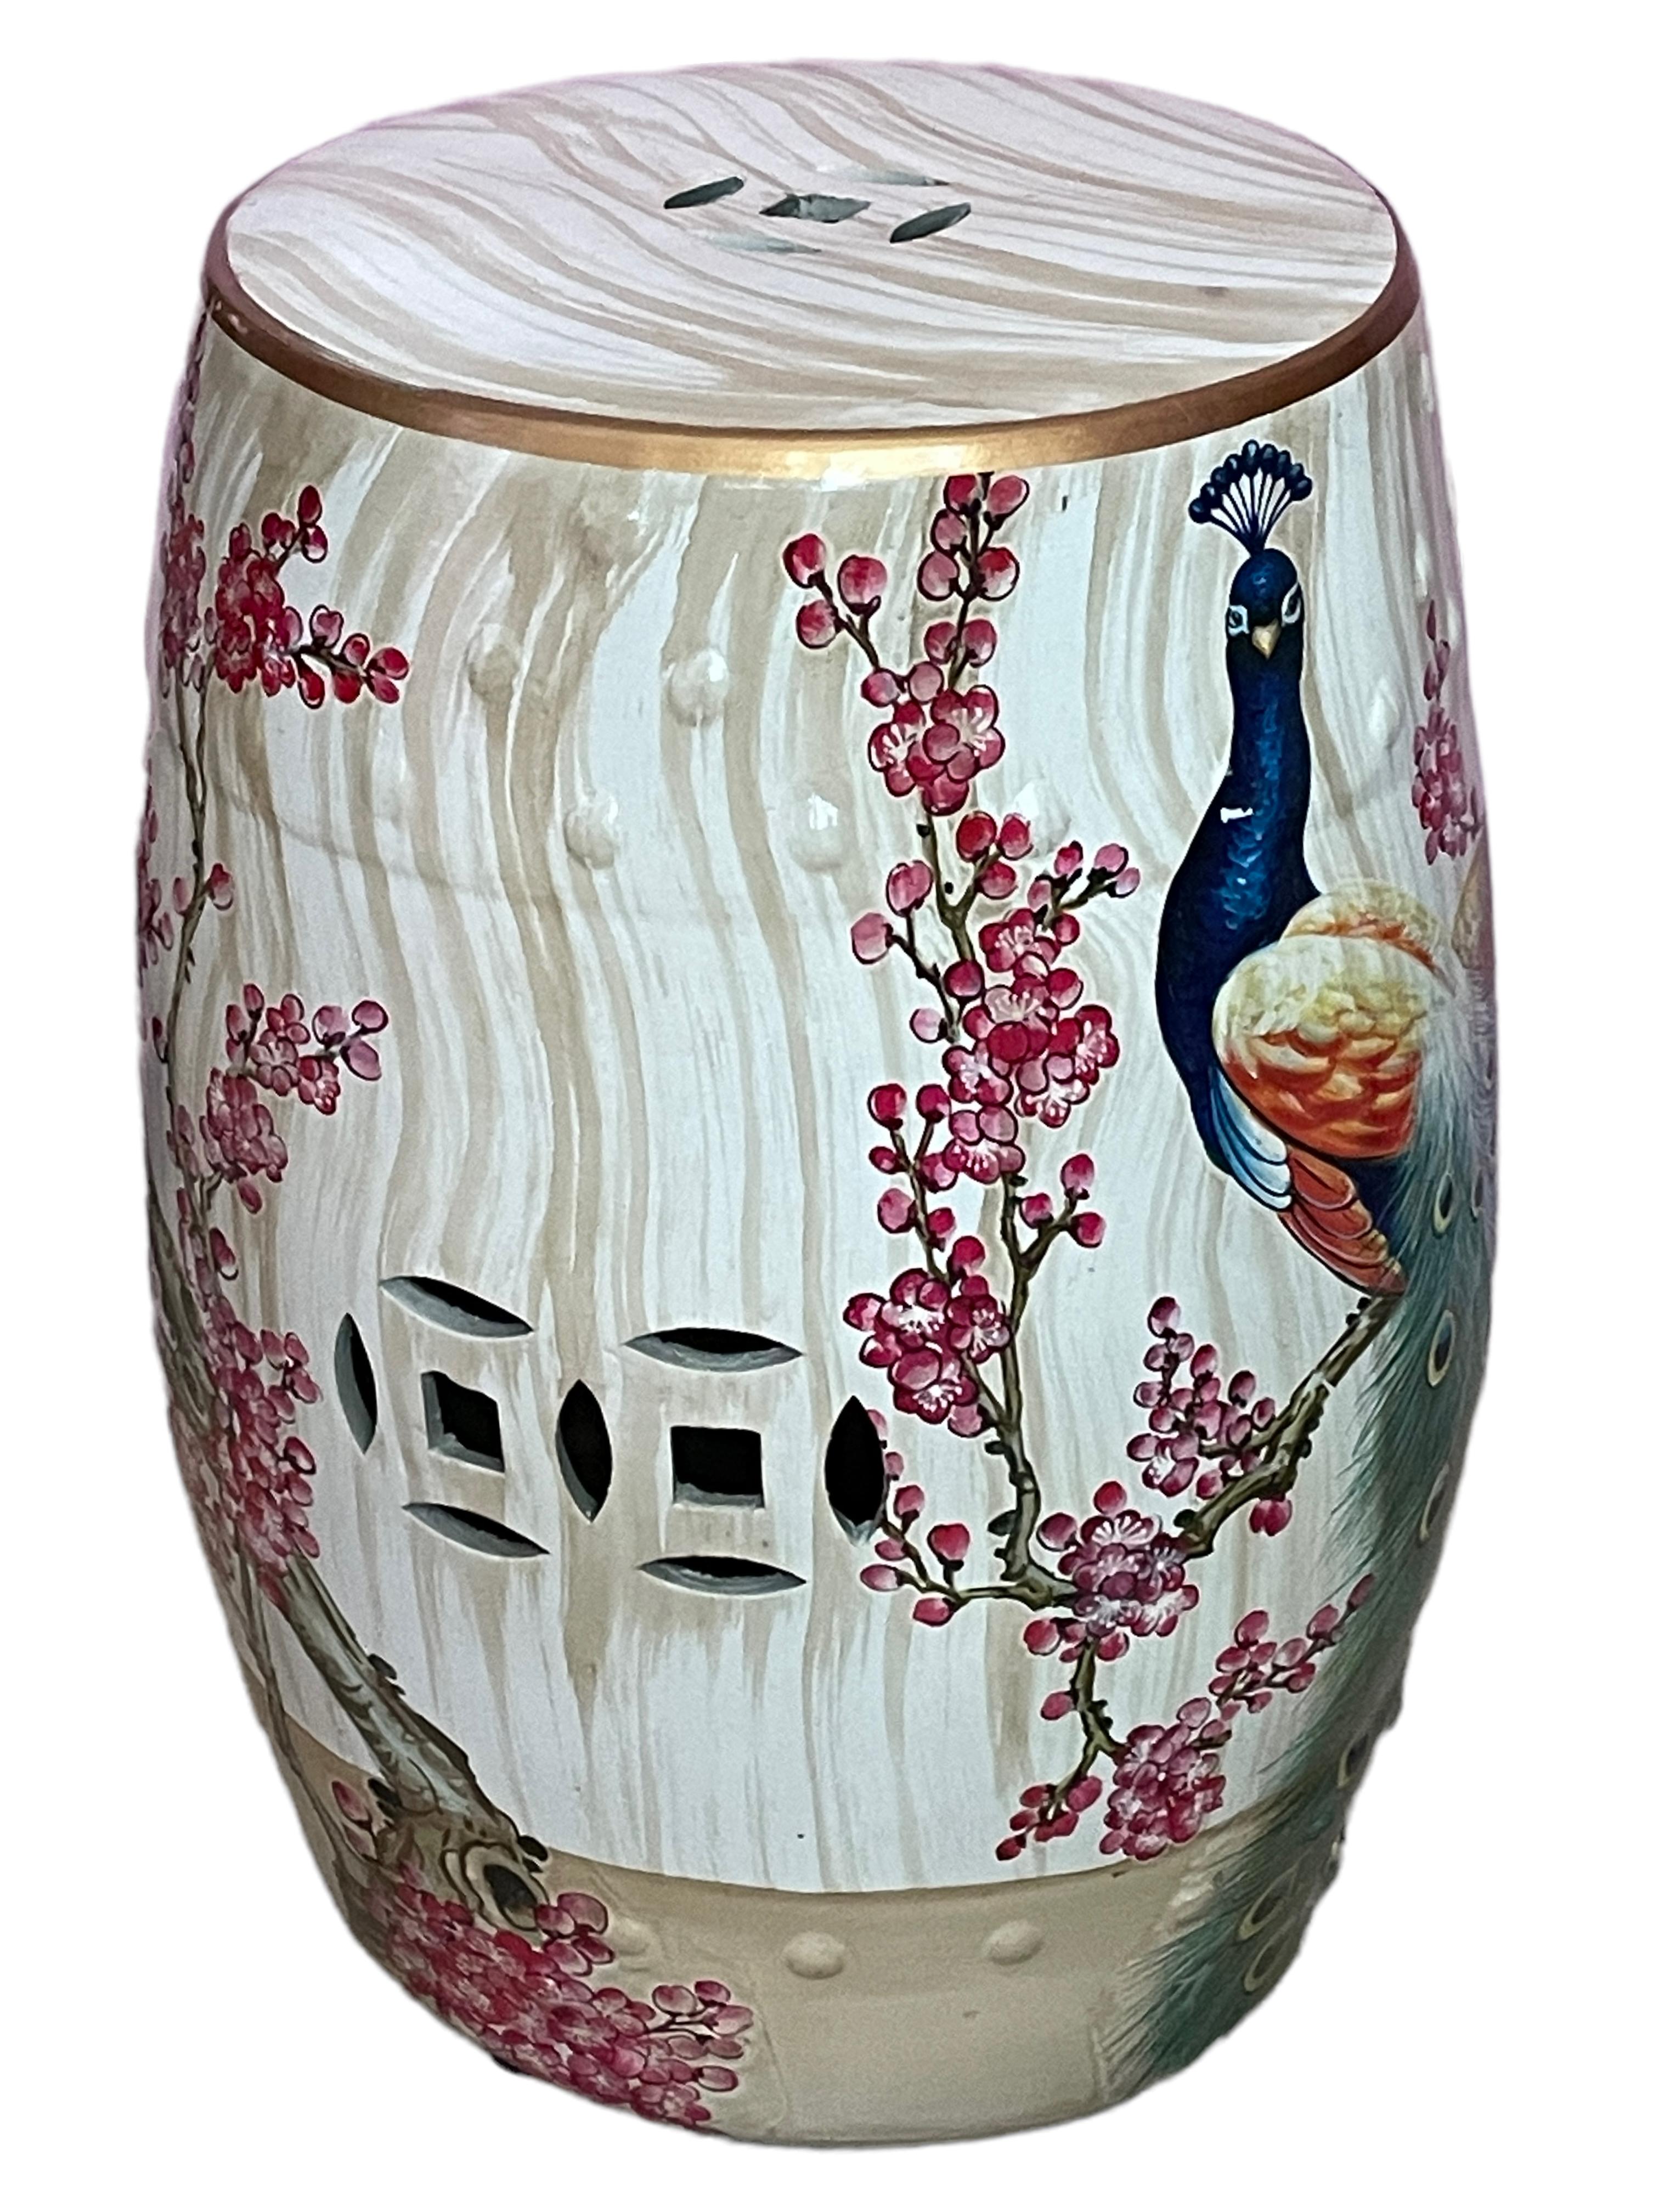 Hollywood Regency Mid-20th Century Chinese Export Hand-Painted Garden Stool Flower Pot Seat For Sale